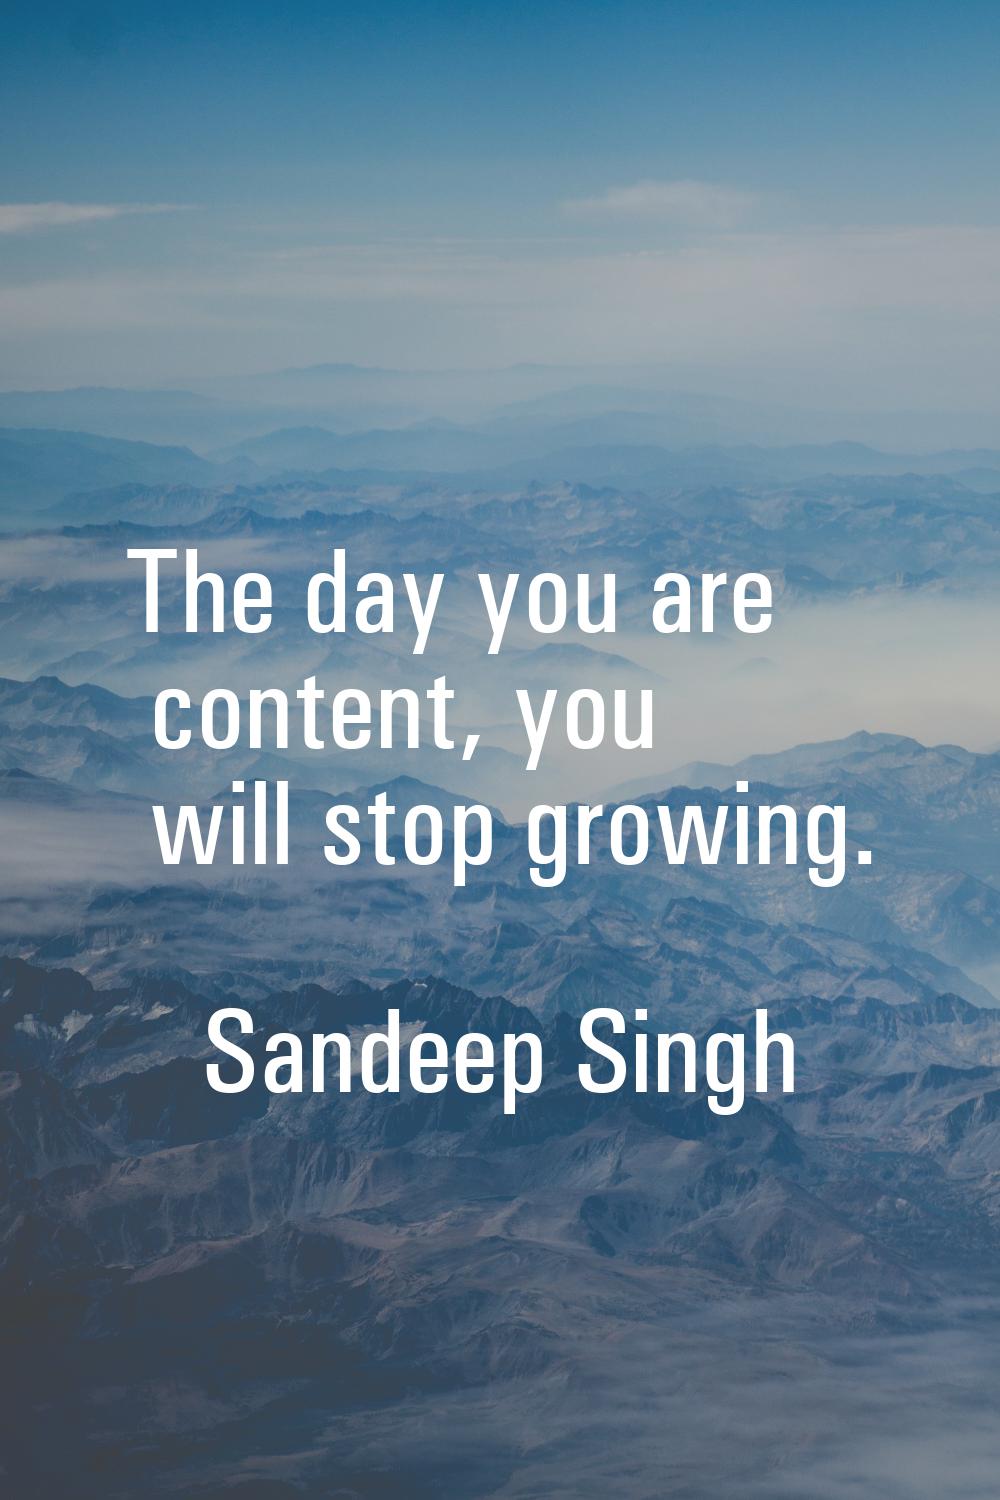 The day you are content, you will stop growing.